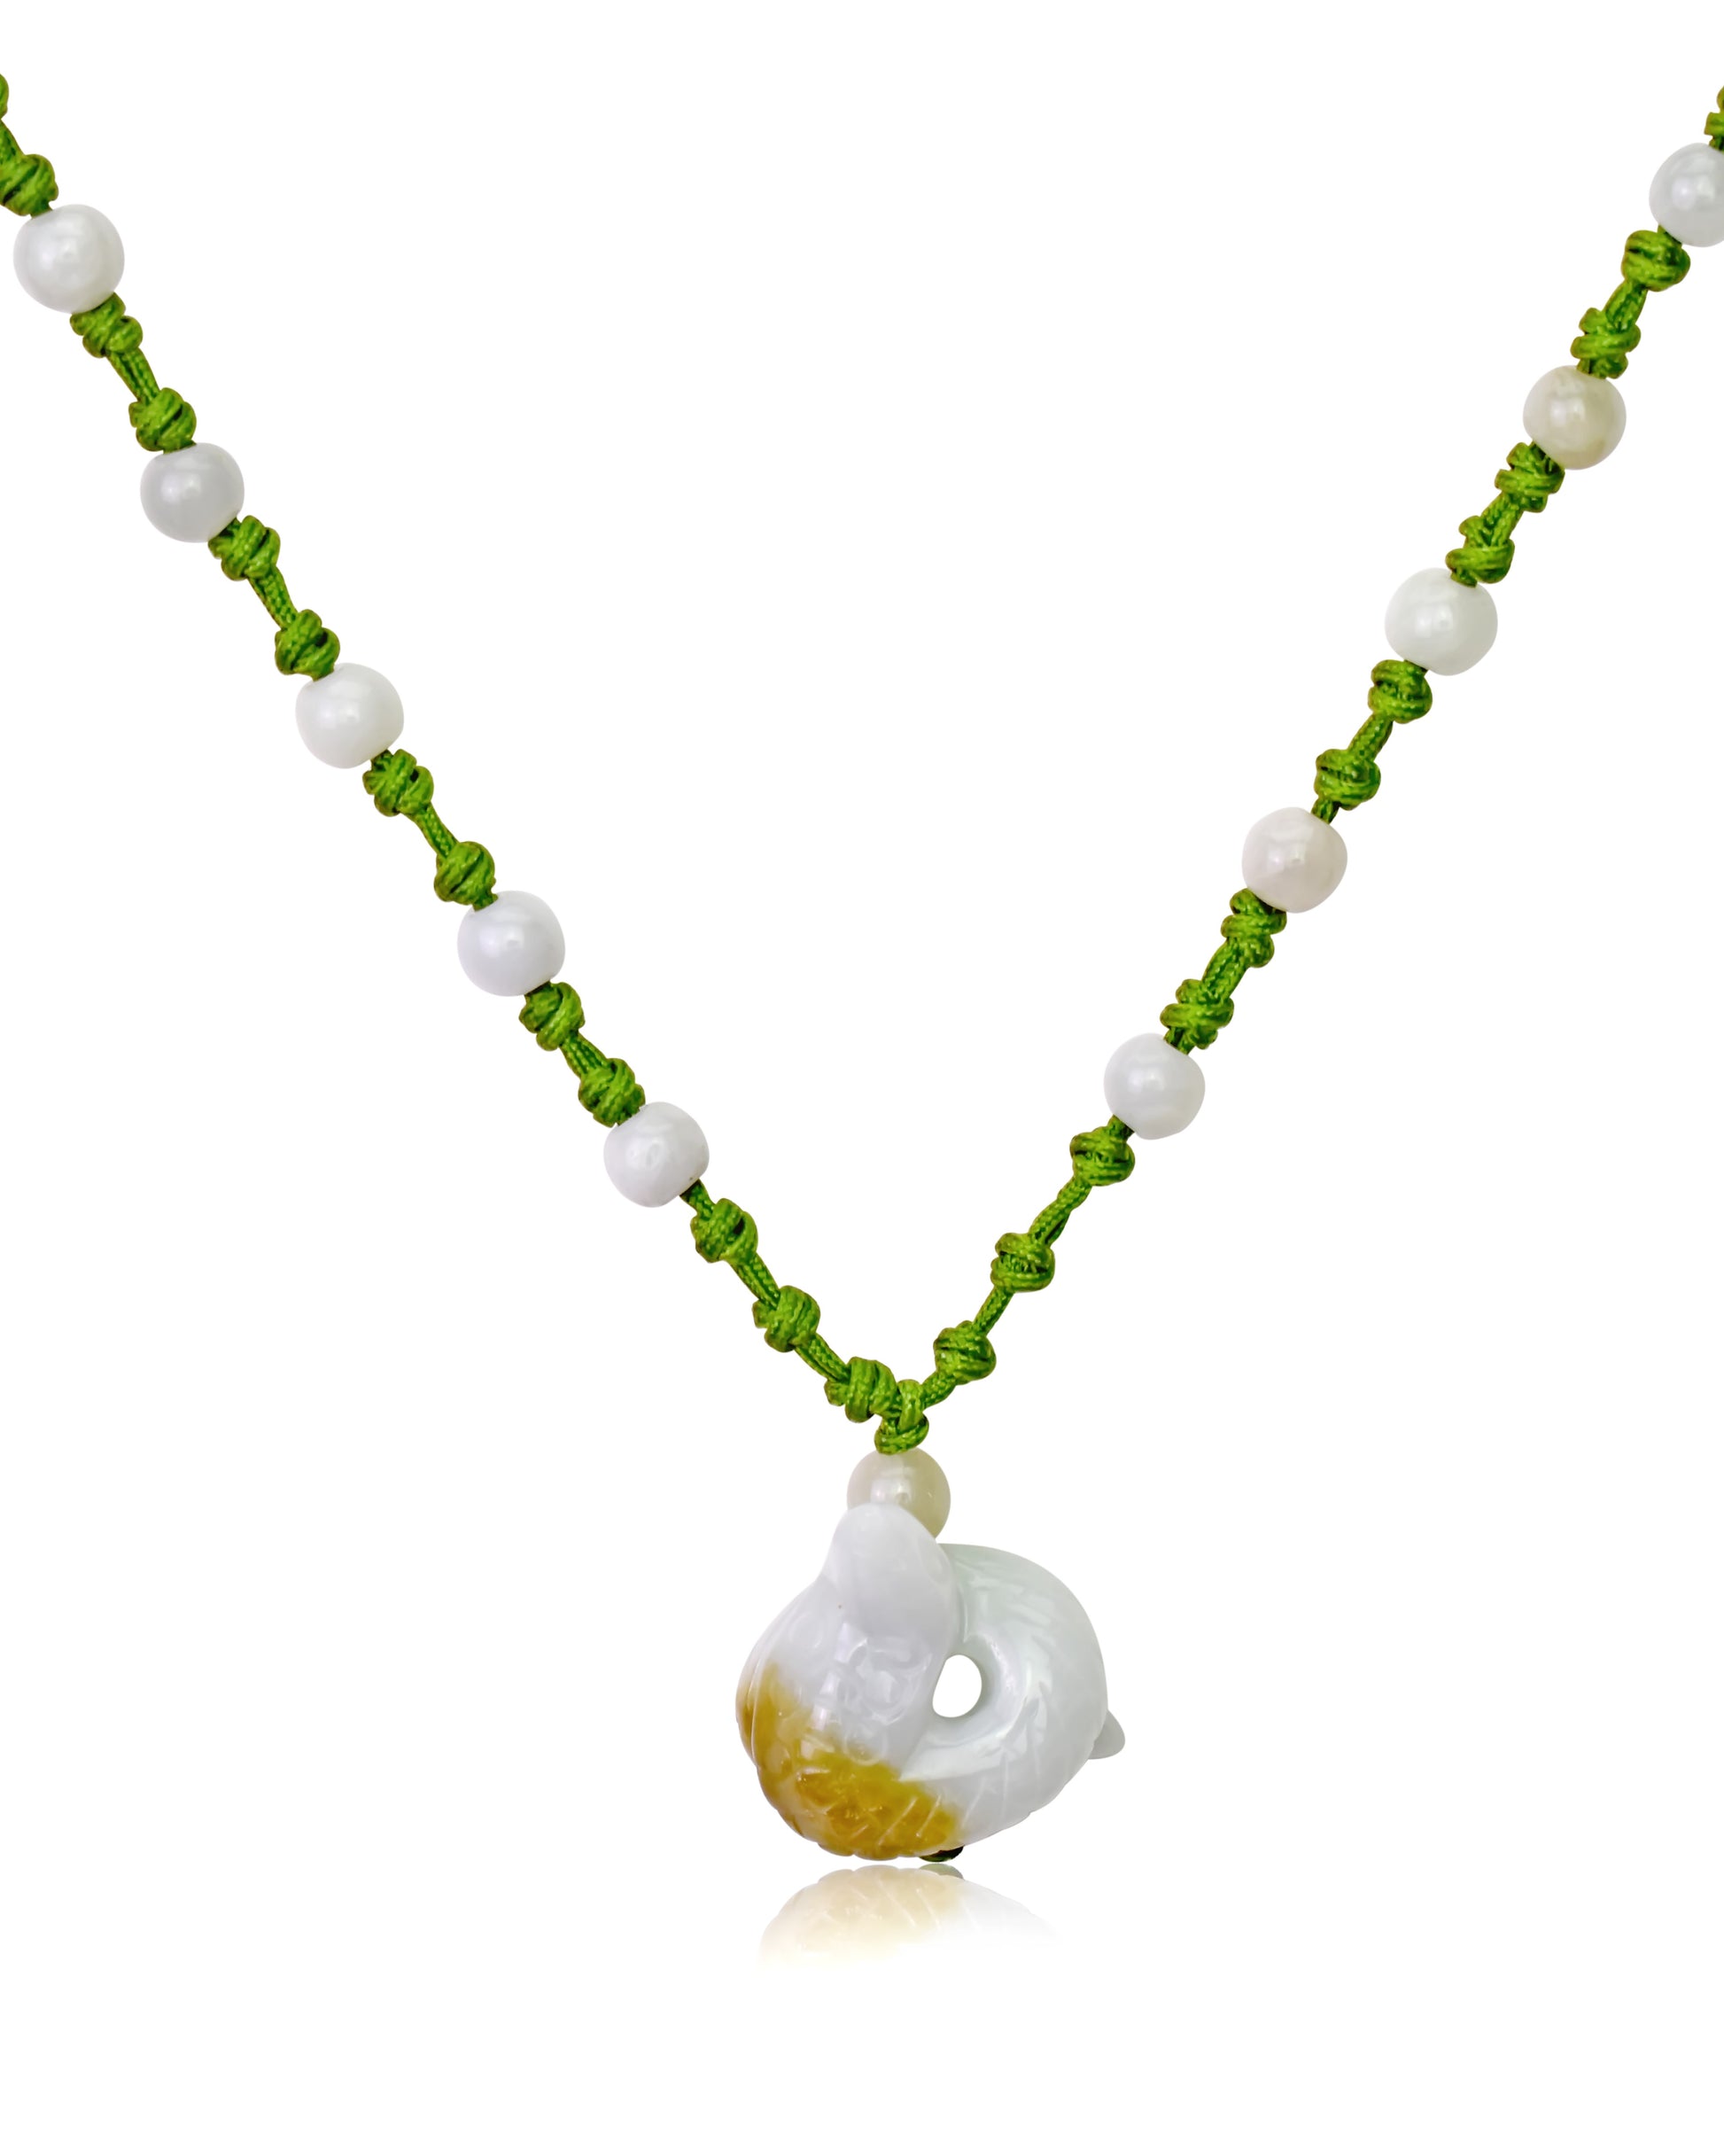 A Unique and Personal Gift: Snake Chinese Zodiac Handmade Jade Necklace